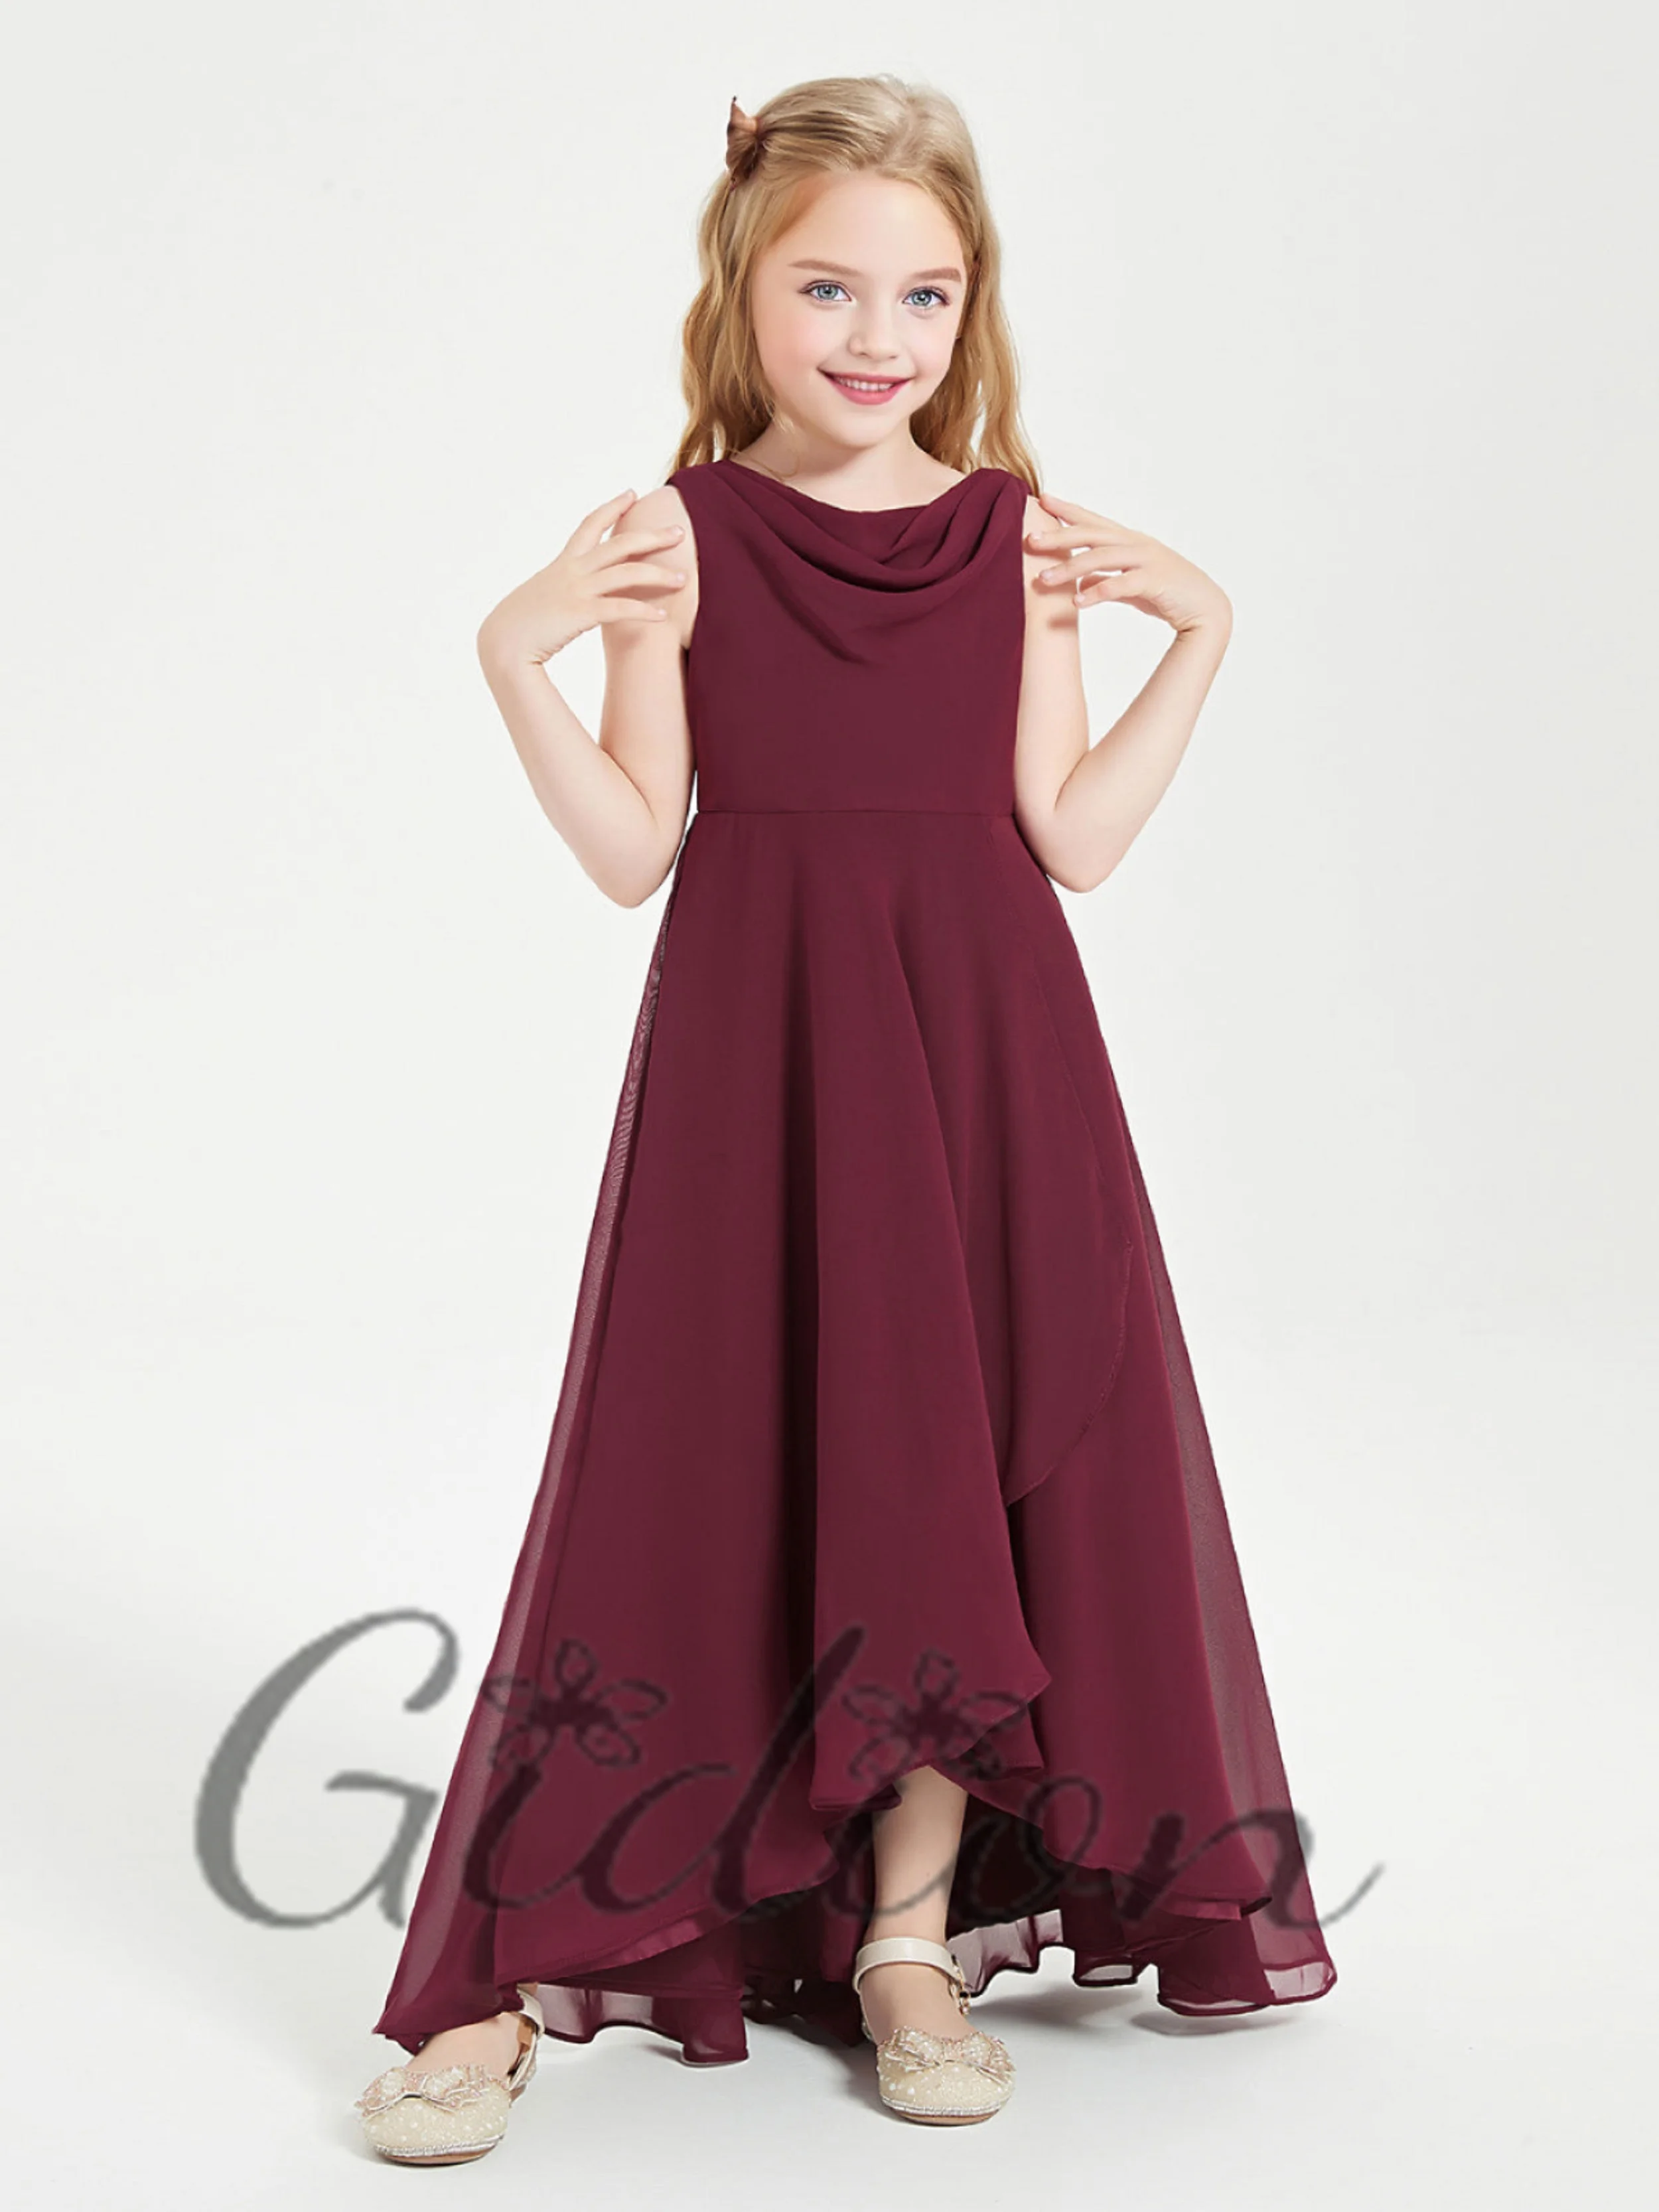 

Asymmetrical Chiffon For Kids Banquet Ceremony Pageant Wedding Birthday Evening Party Prom Event Ball Junior Bridesmaid Dress